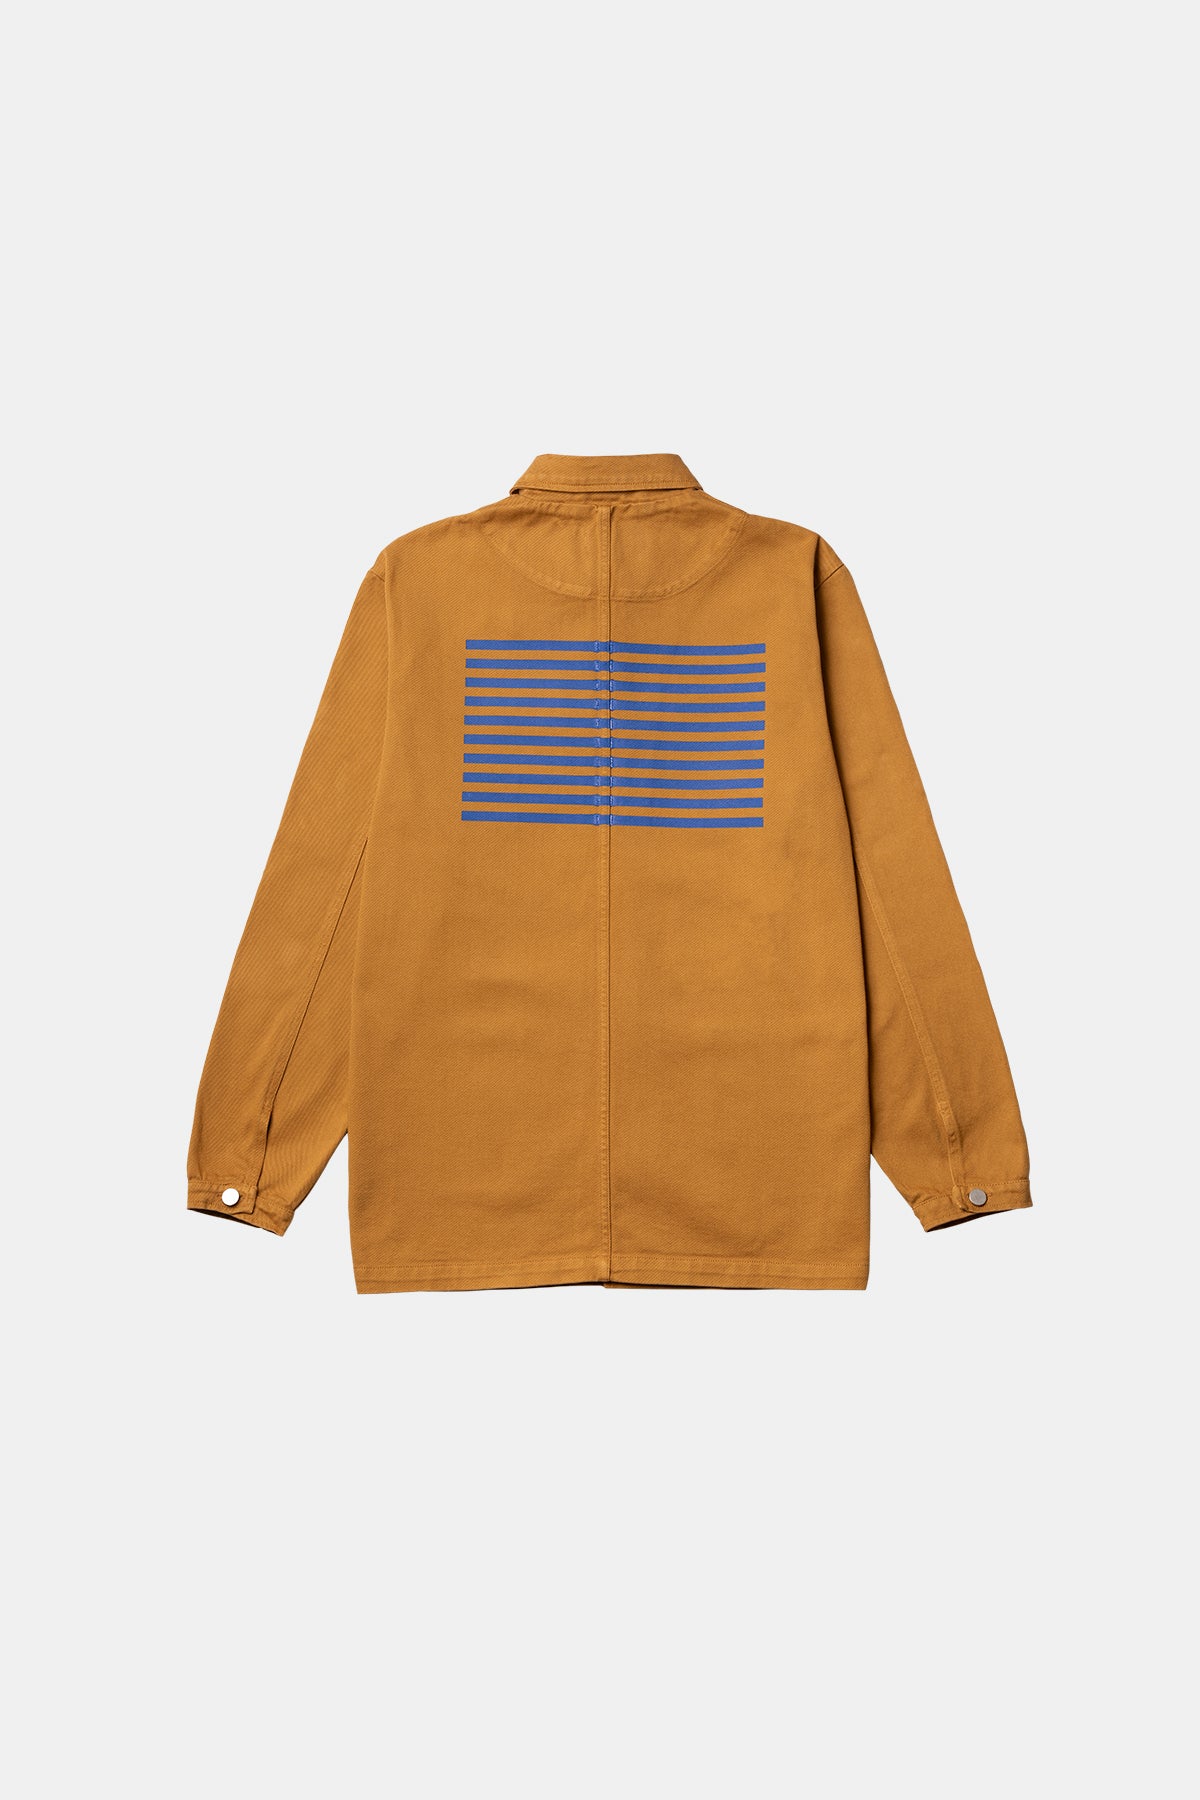 JACKET CANVAS FREQUENCY SAND & STEEL BLUE